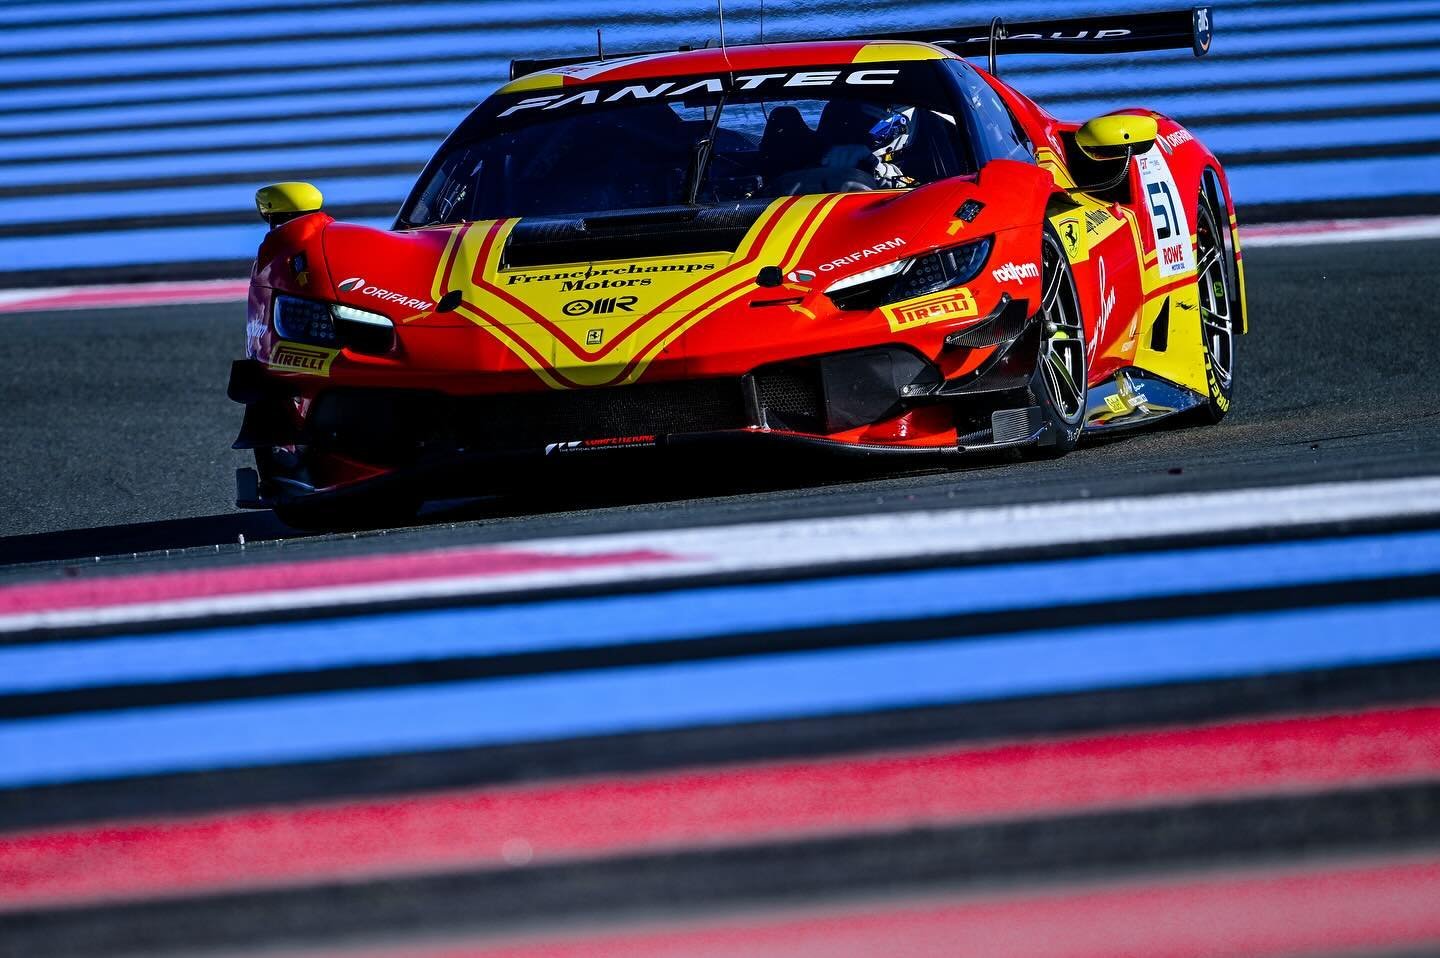 AF Corse-Francorchamps Motors will return to the GT World Challenge Europe Endurance Cup with two Ferrari 296 GT3s entered in the Pro class.

The number 51 car will see a trio of official Ferrari drivers at the wheel, with Alessandro Pier Guidi, Davi